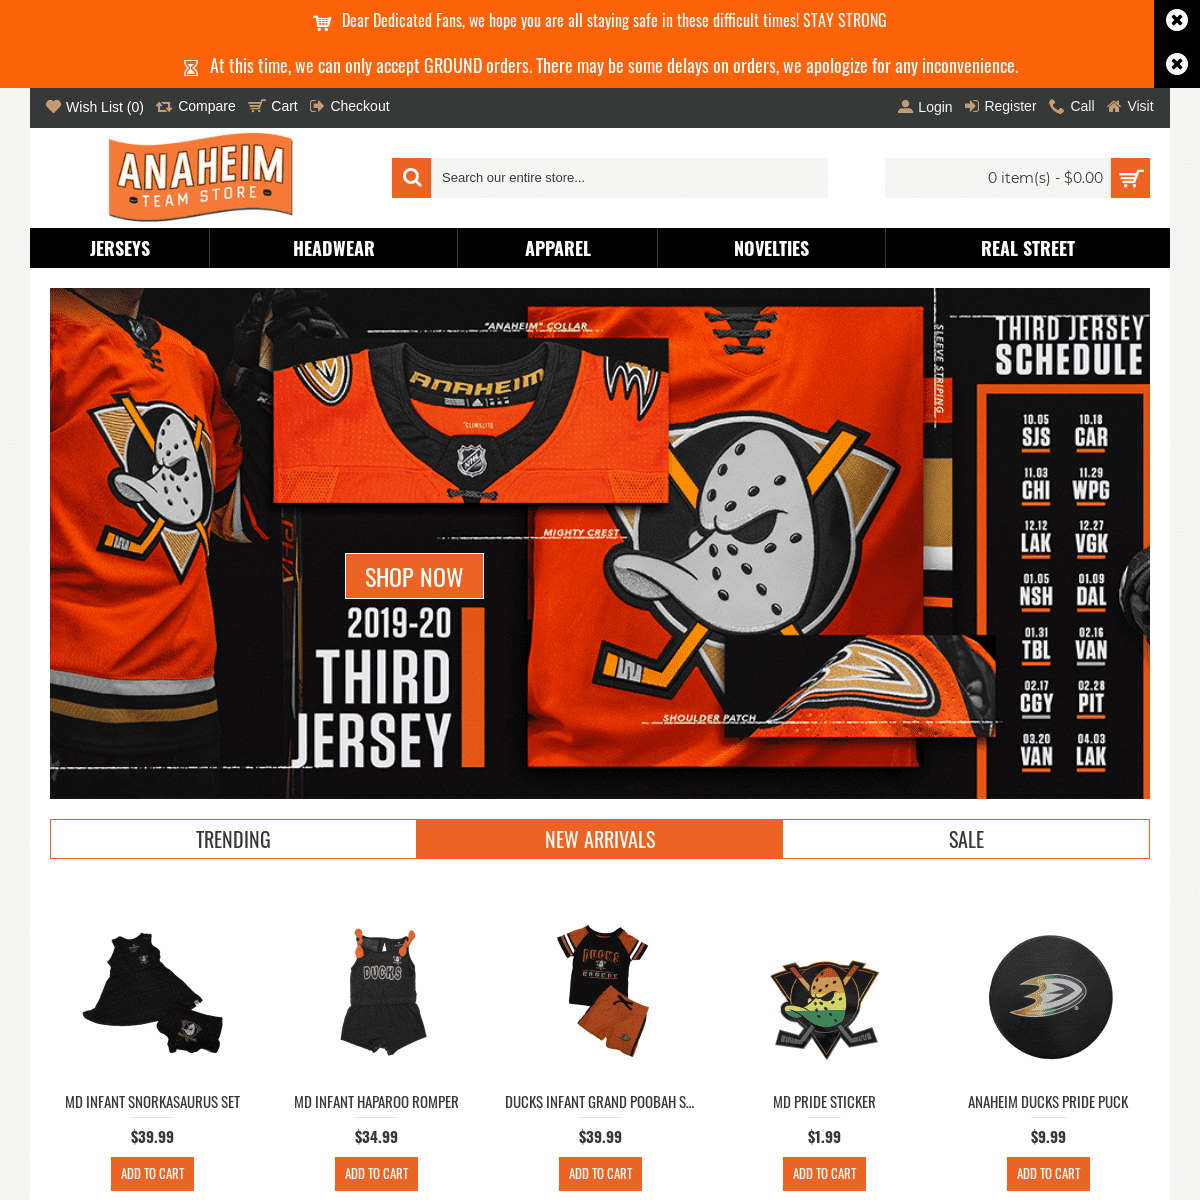 A complete backup of anaheimteamstore.com